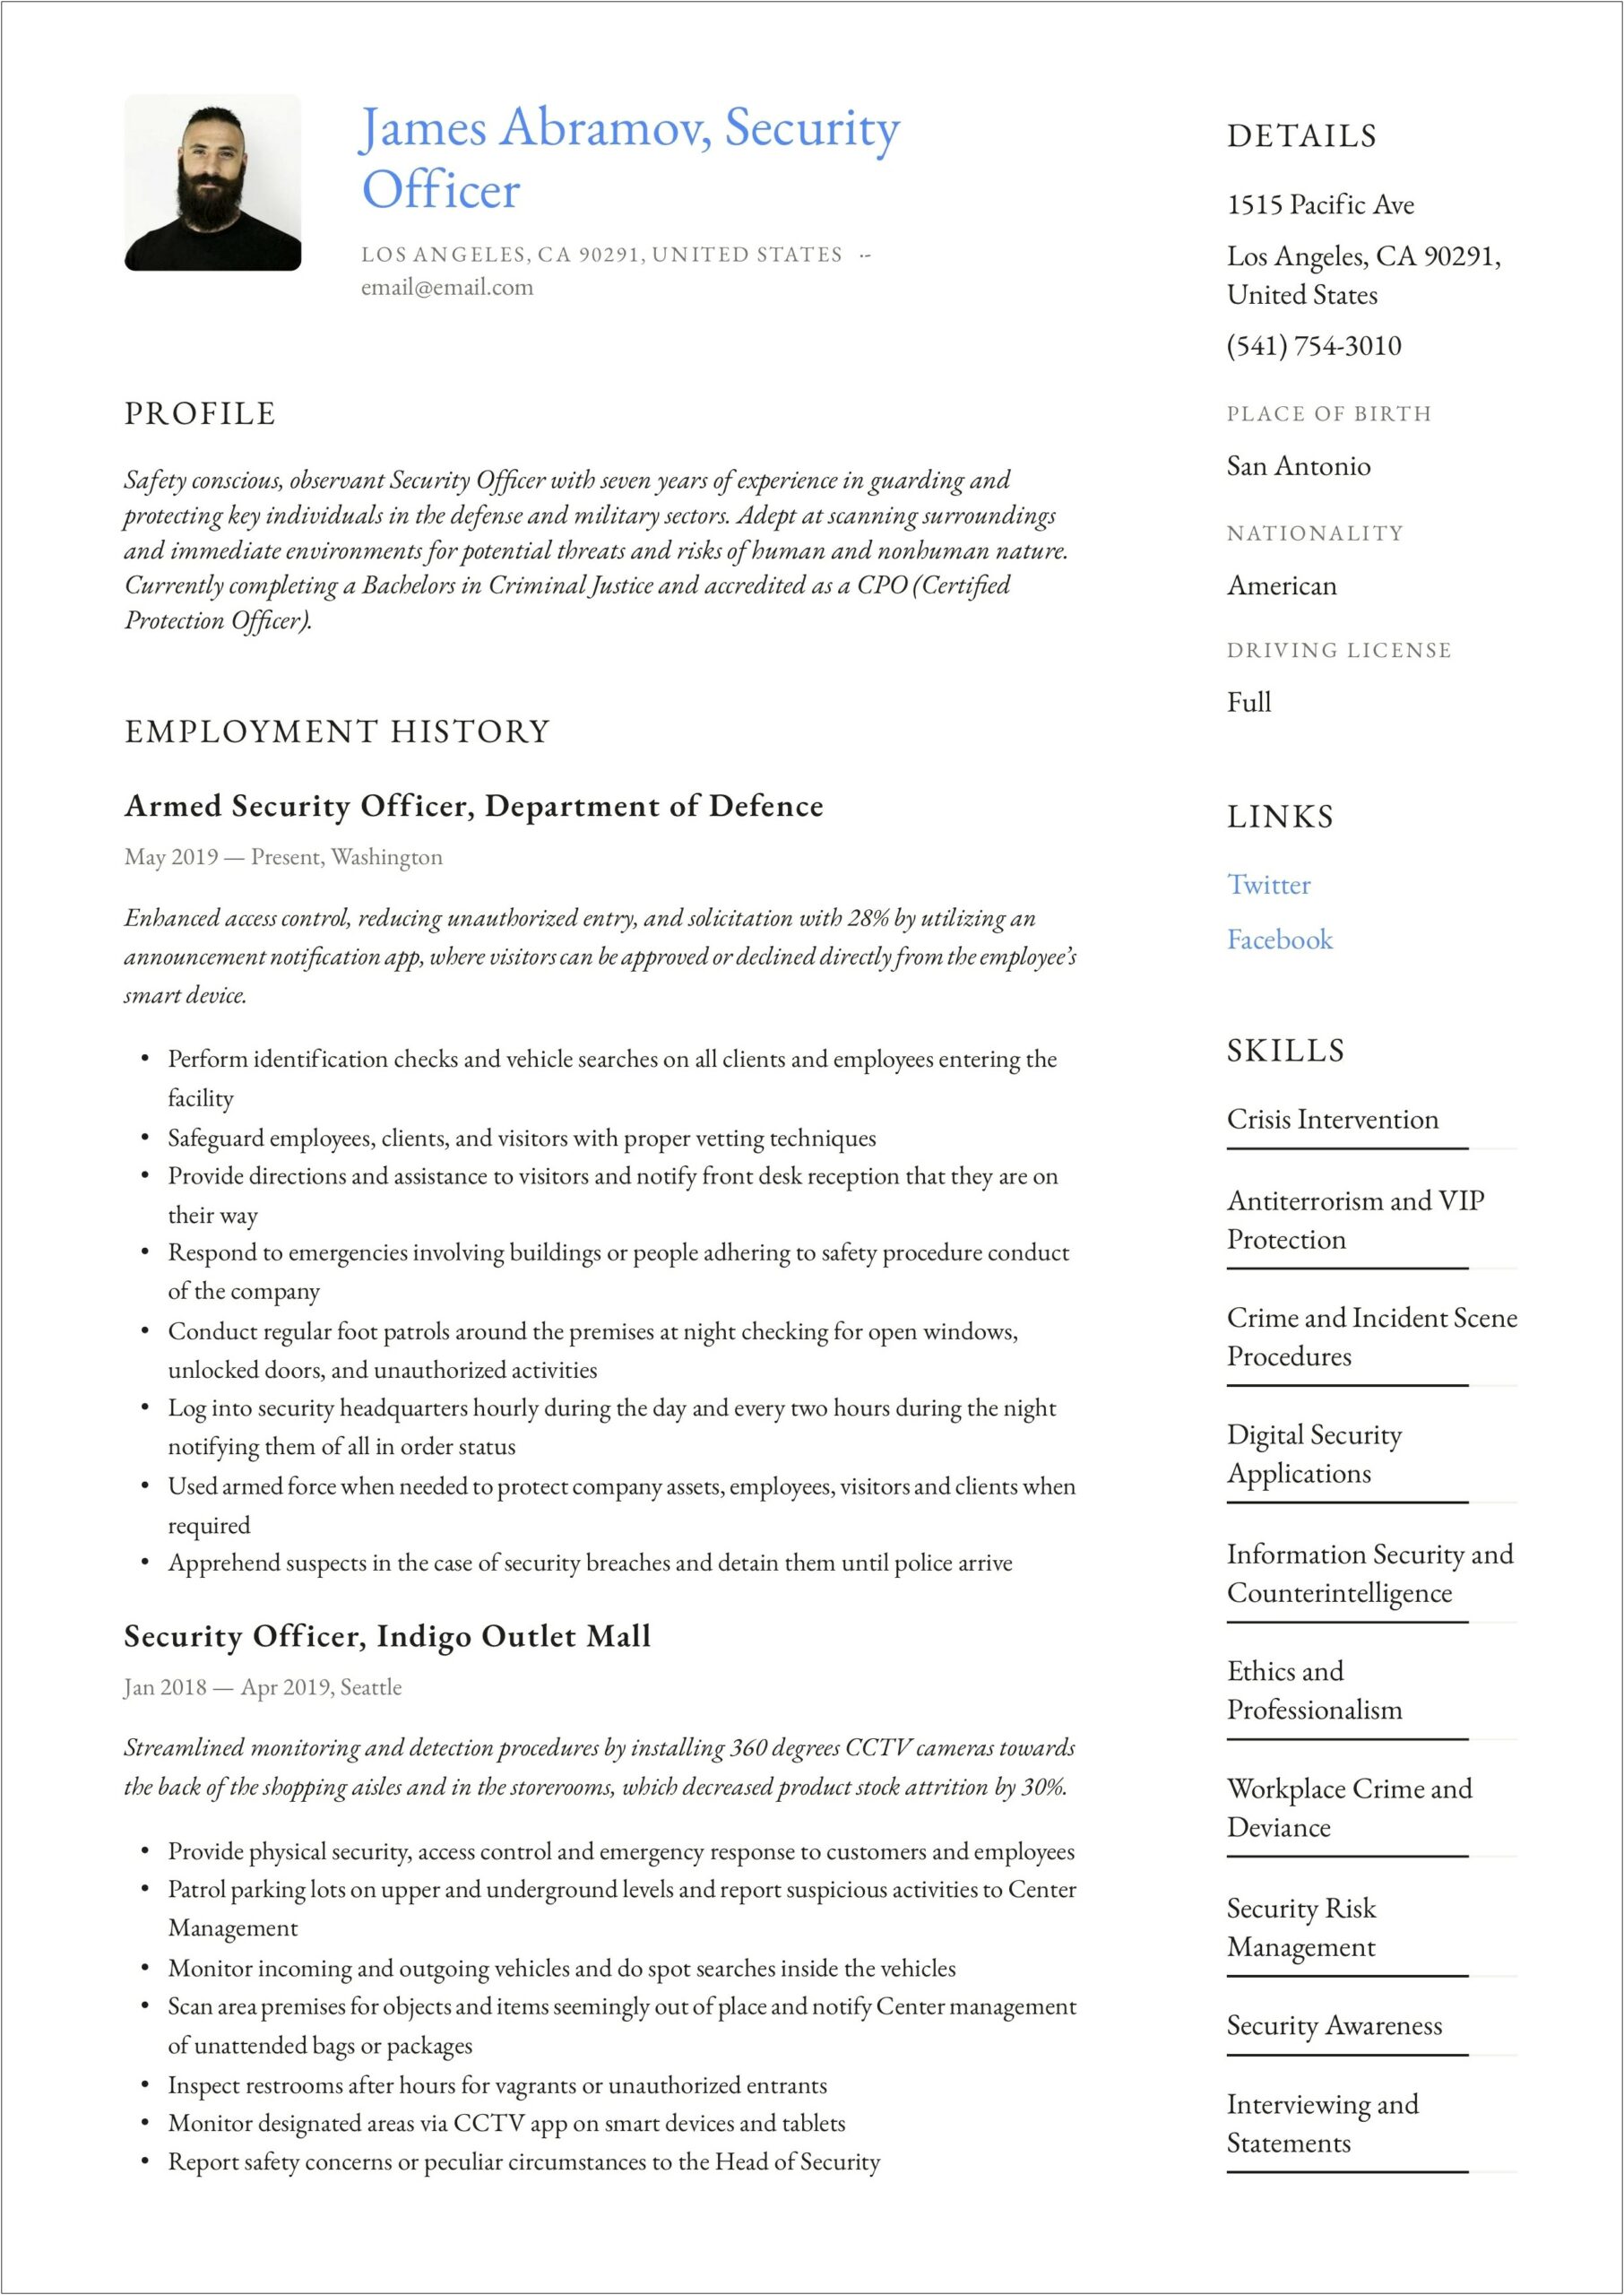 Examples Of Resumes For Security Officer Jobs